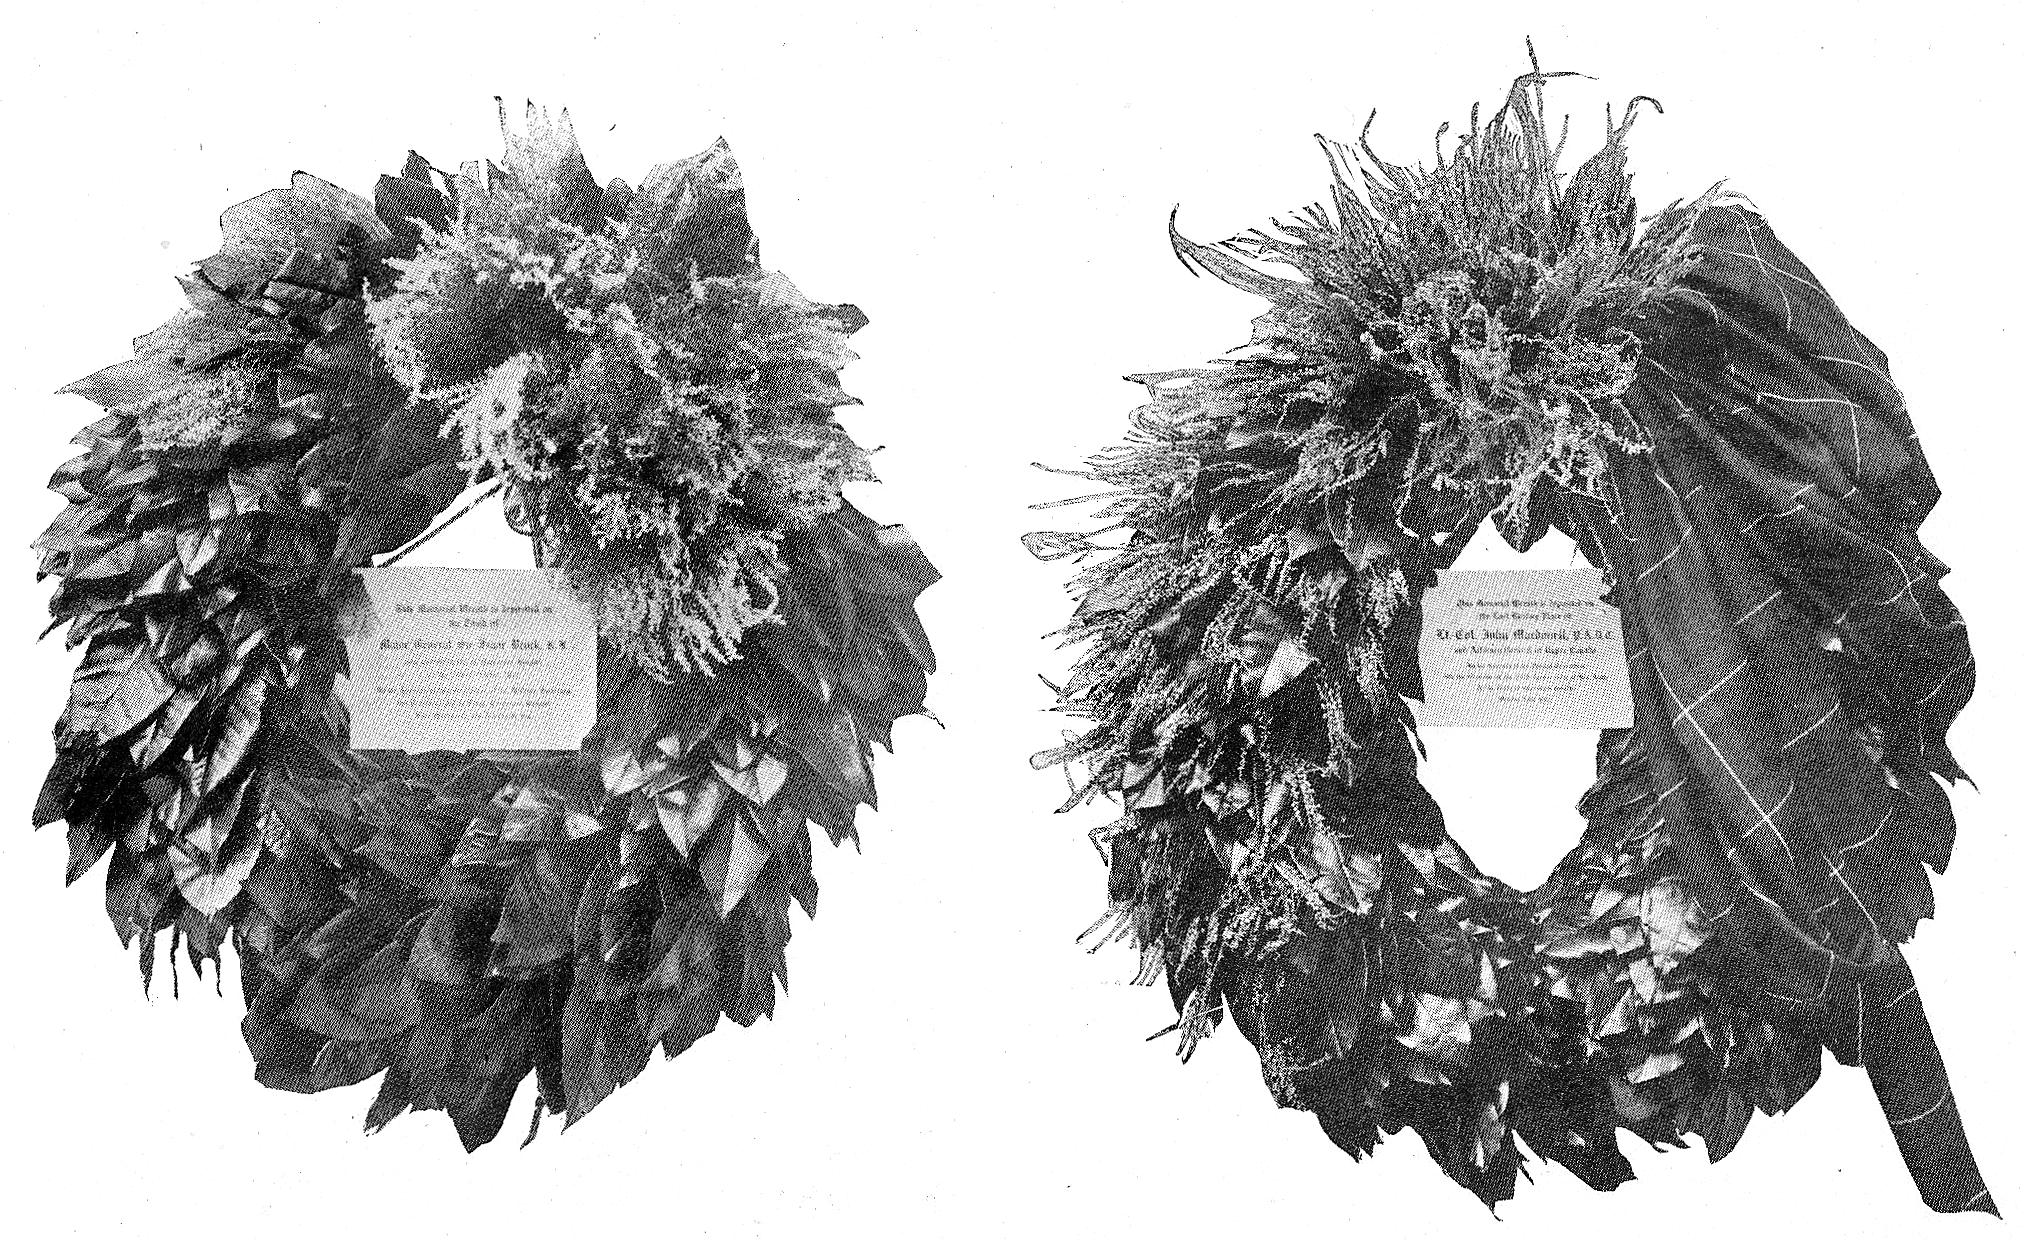 [Memorial wreaths on the tombs, at Queenston Heights, of Major-General Sir Isaac Brock, Kt., and Colonel John Macdonell P.A.D.C, Attorney-General of Upper Canada.]